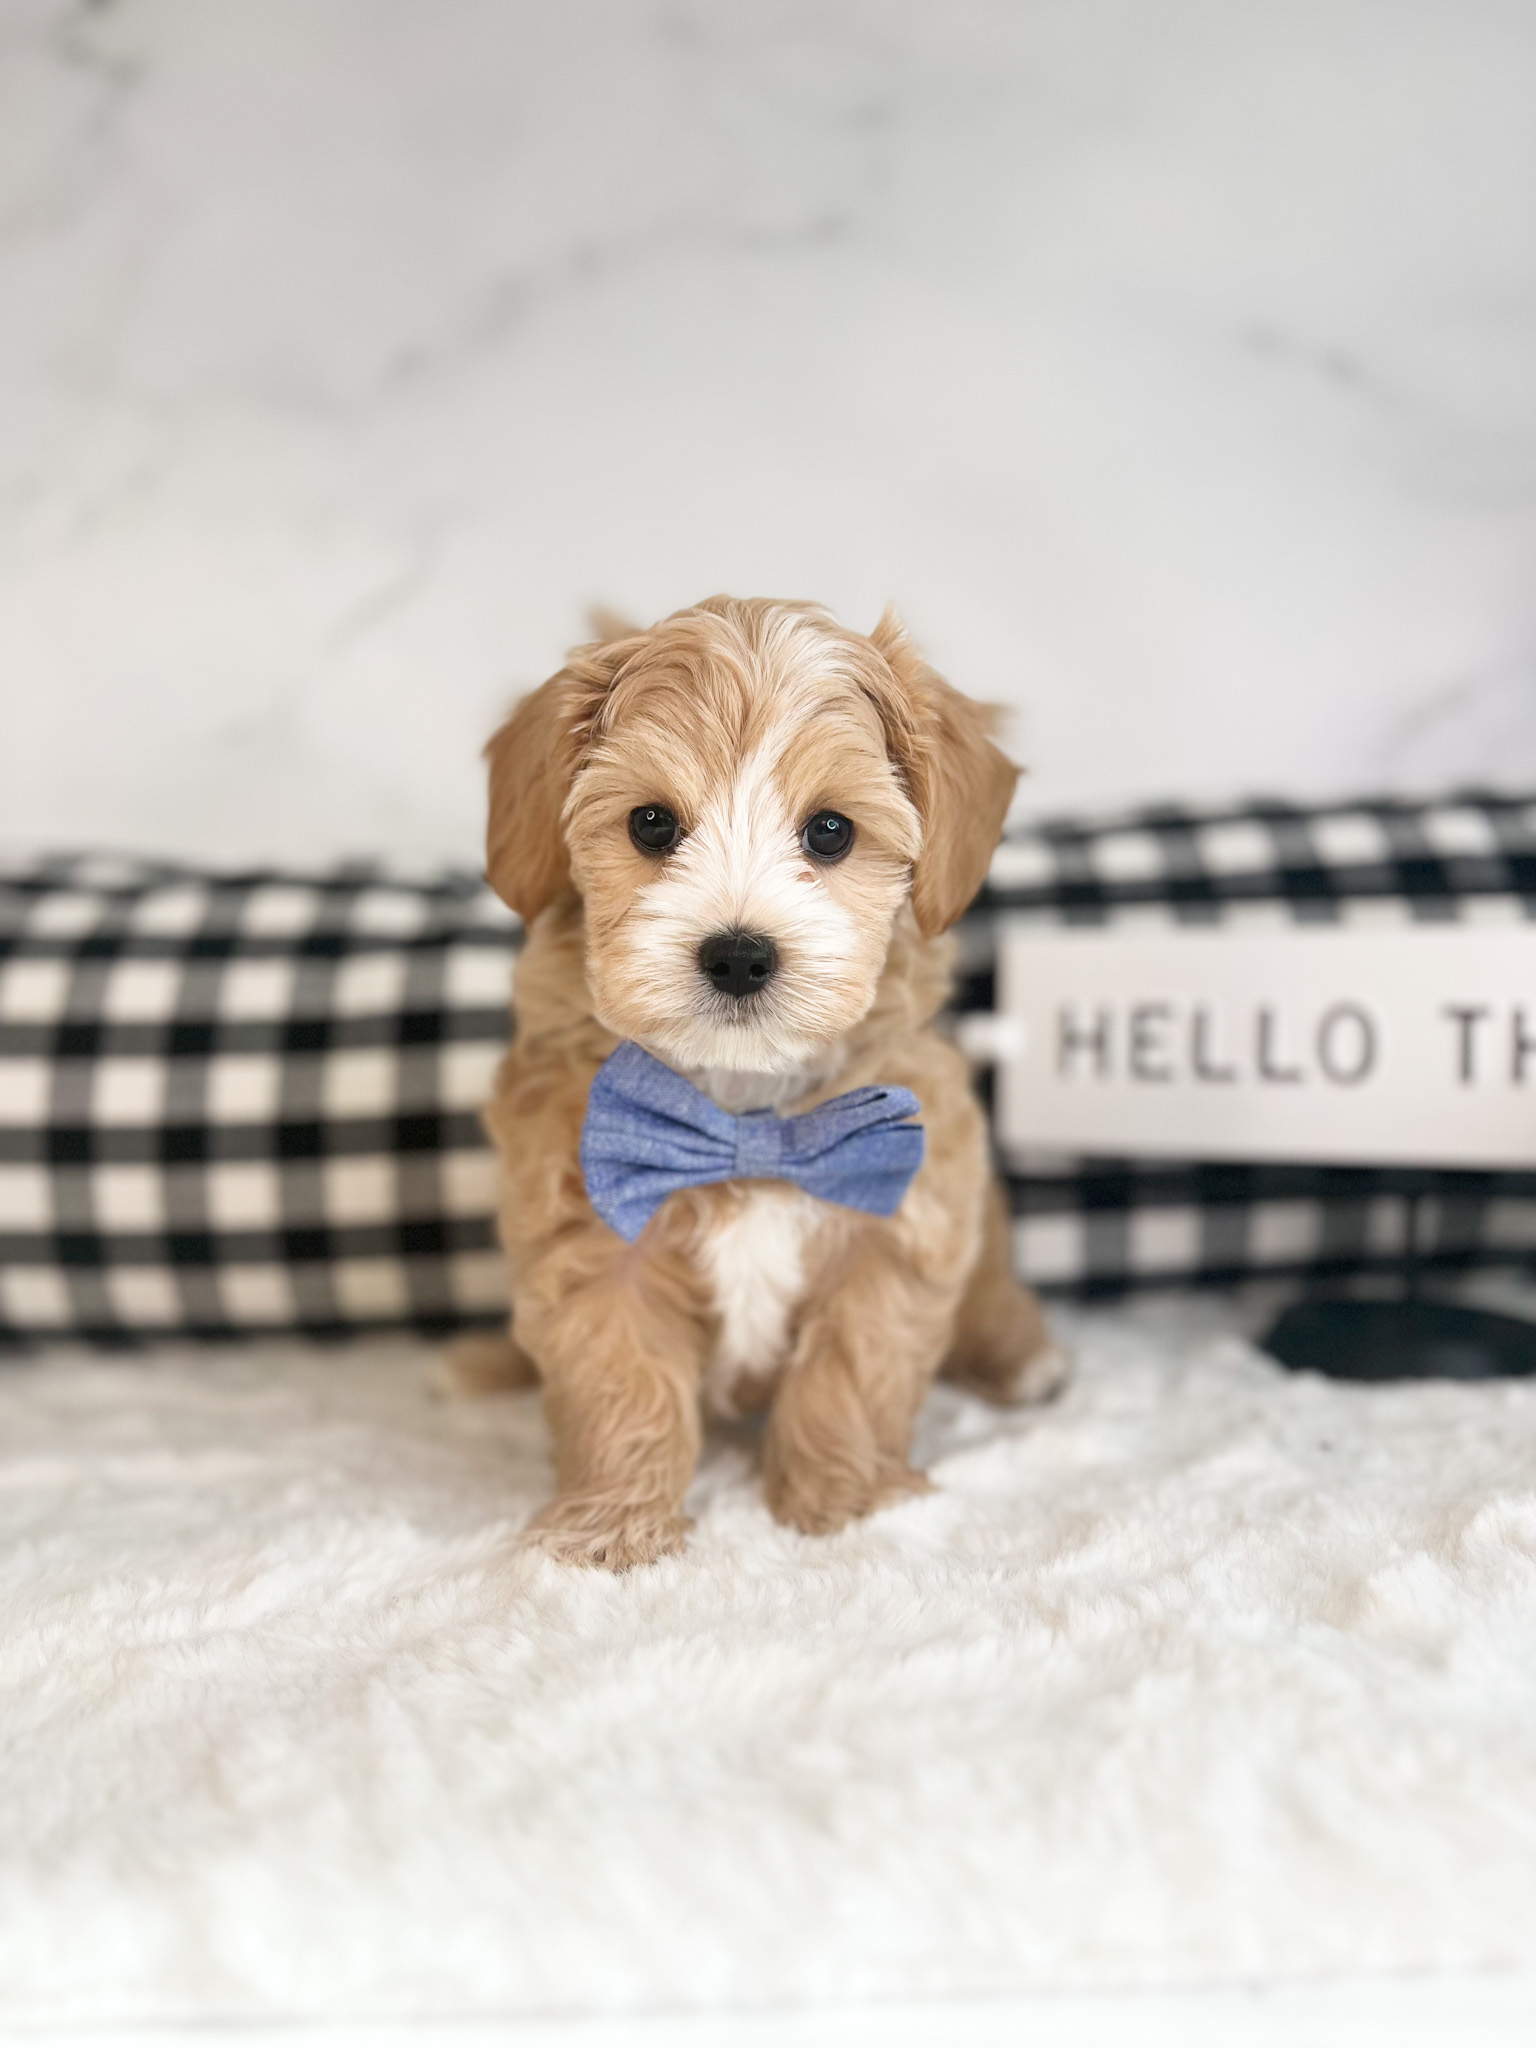 An elegant bedecked pup, sporting a refined bow tie, calmly seated on a comfortable bed.